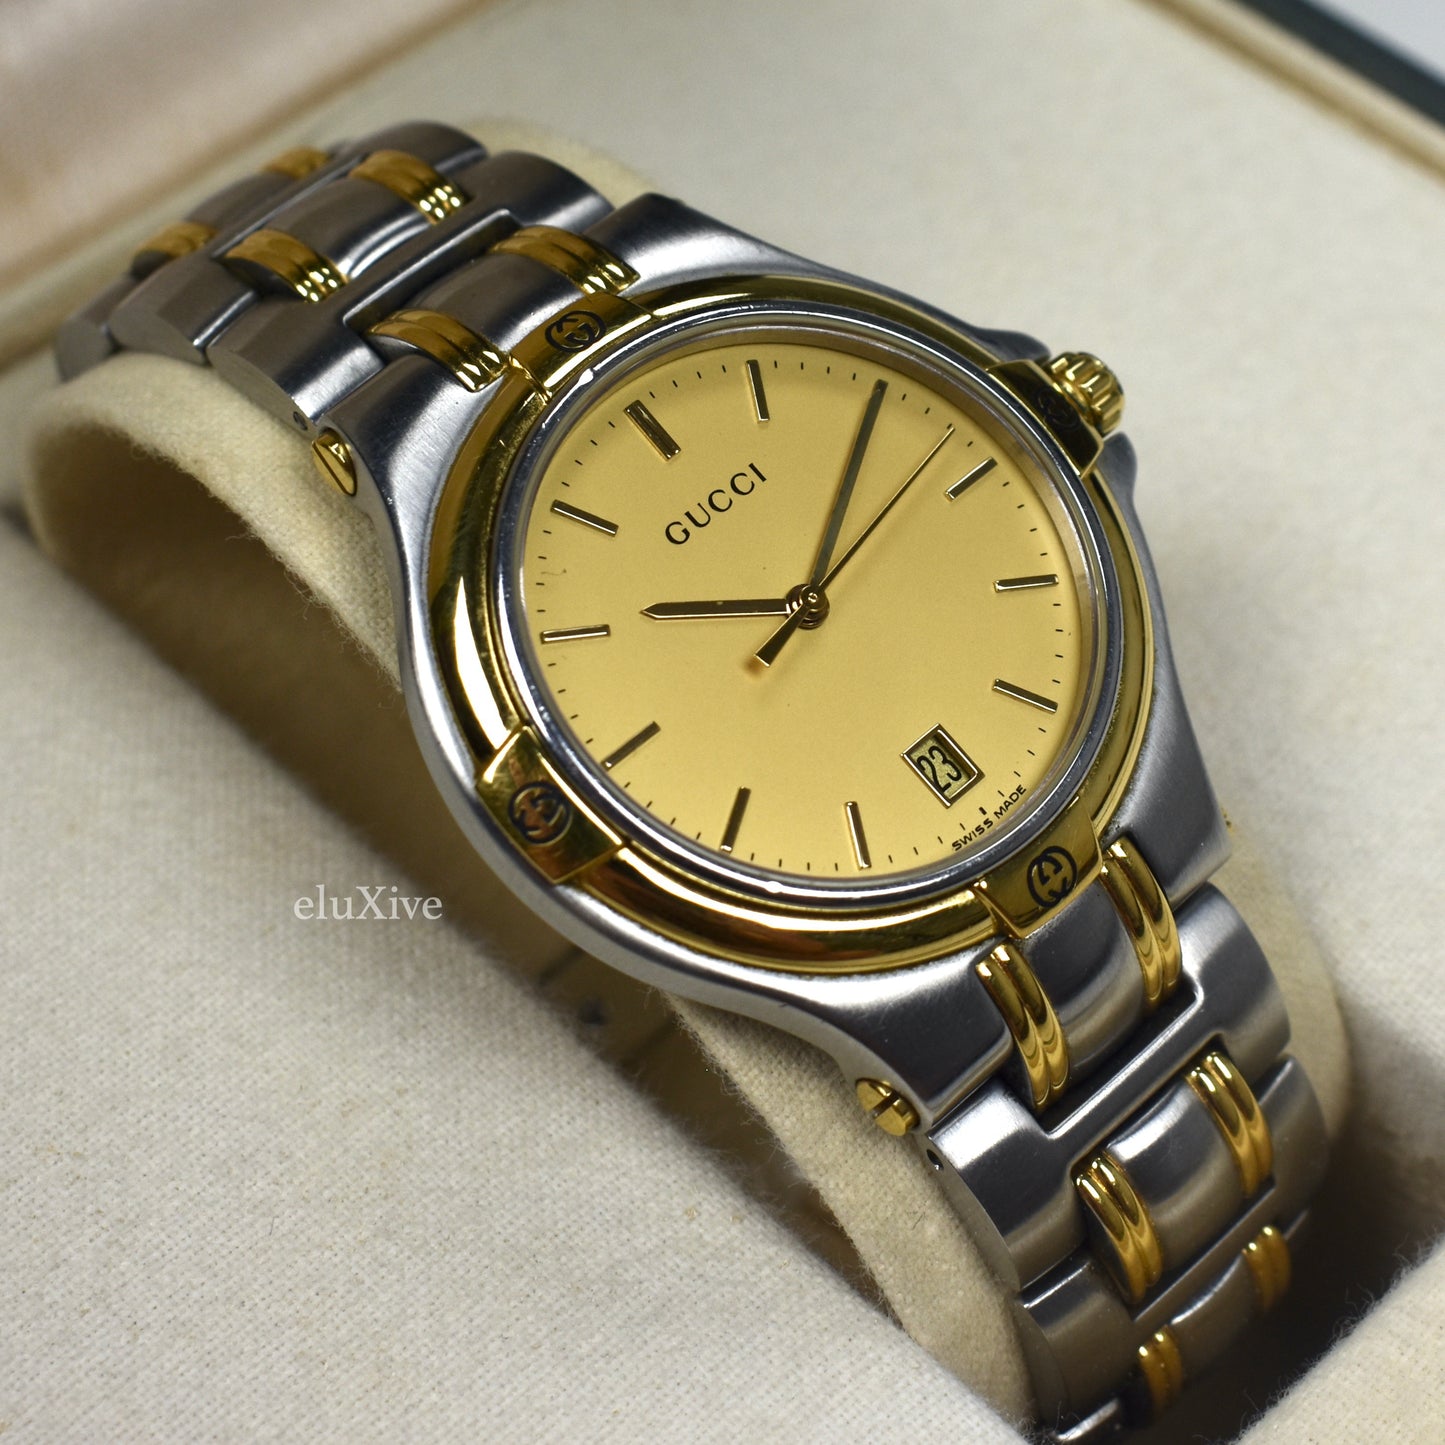 Gucci - 9040M Gold/Steel Champagne Dial Watch